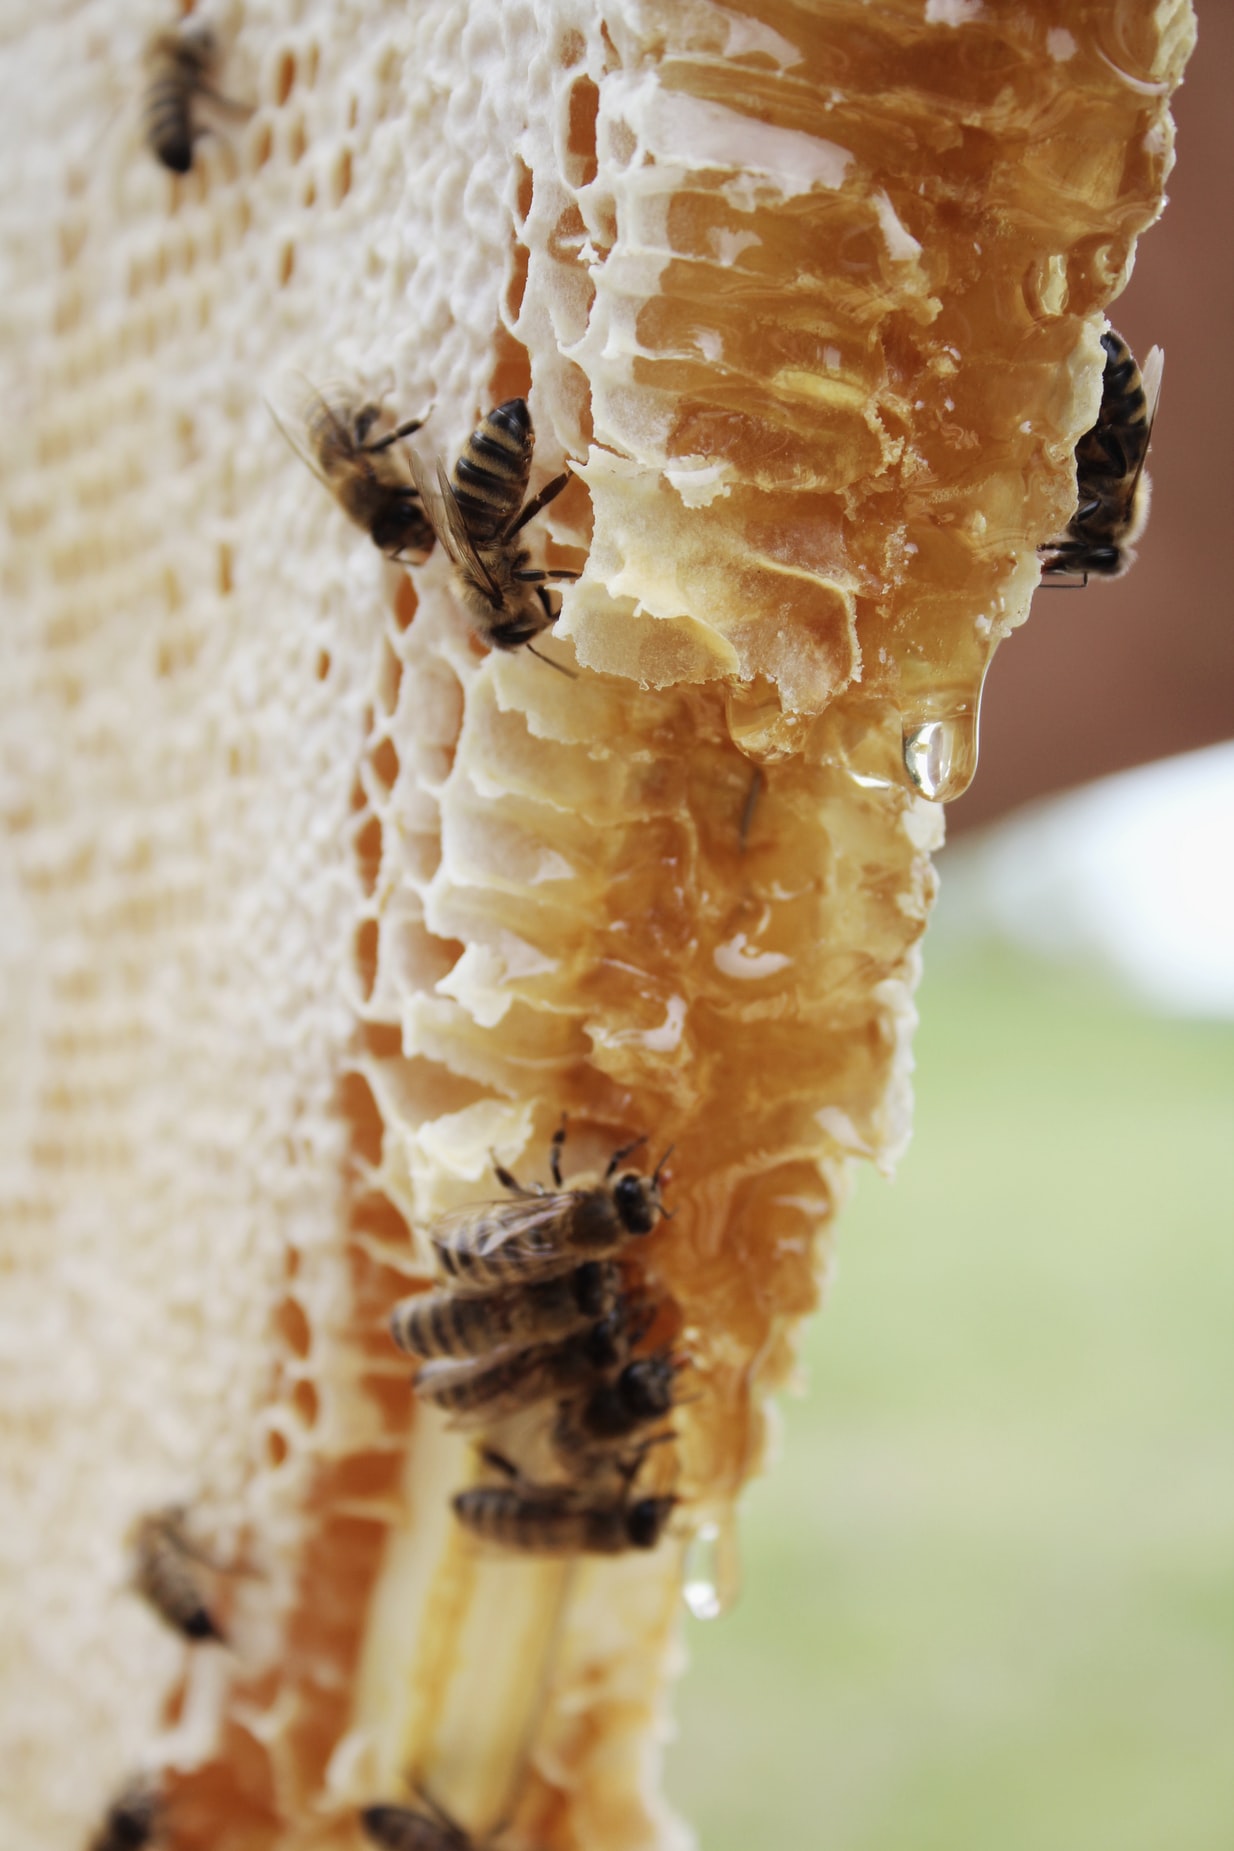 It also collects and processes tonnes of honey from beekeepers all over Albania, where there are some 360,000 registered hives.